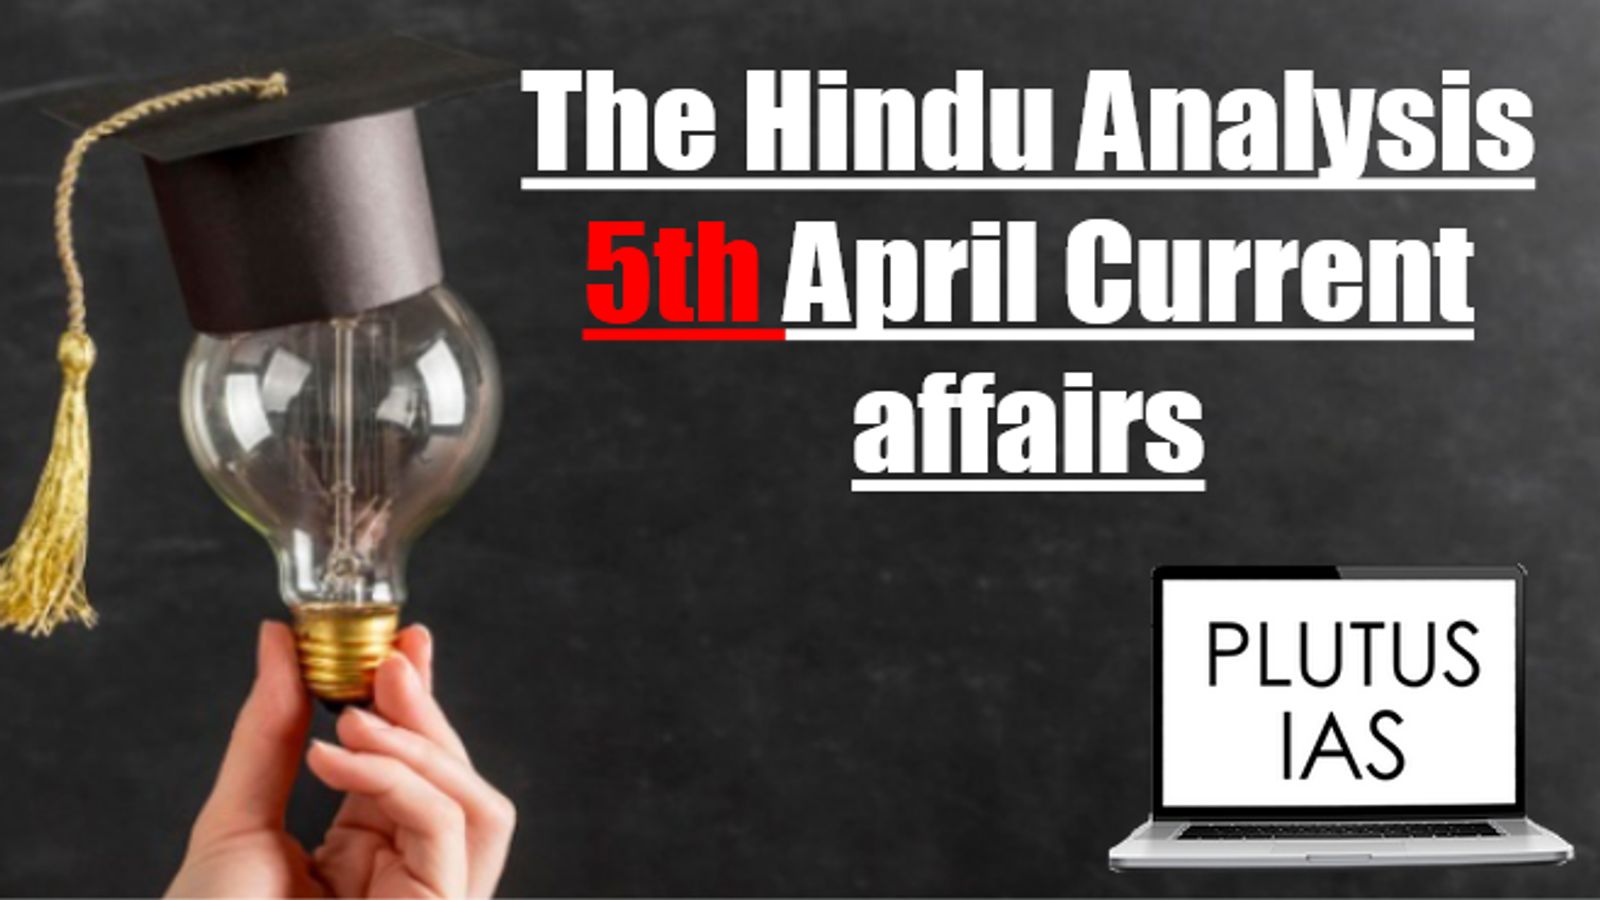 Today Current Affairs 5th April